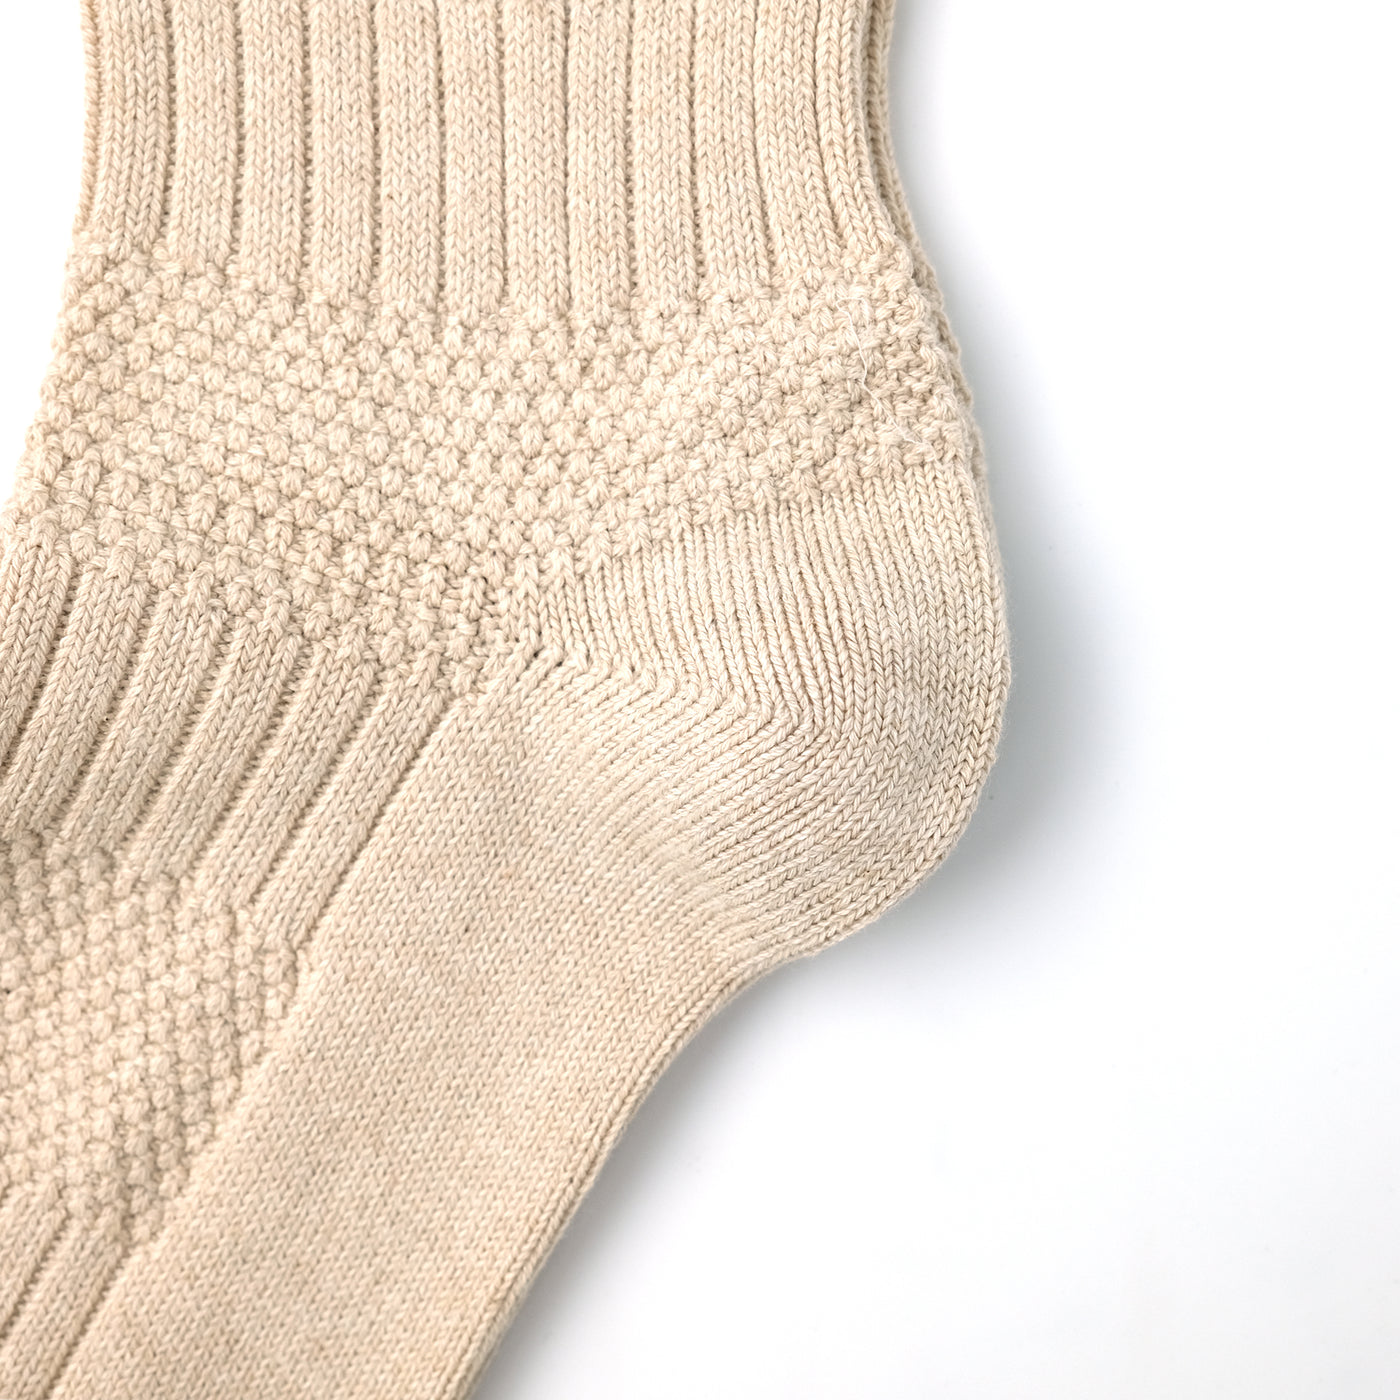 LINK COLLECTION Canalé Raw White Socks